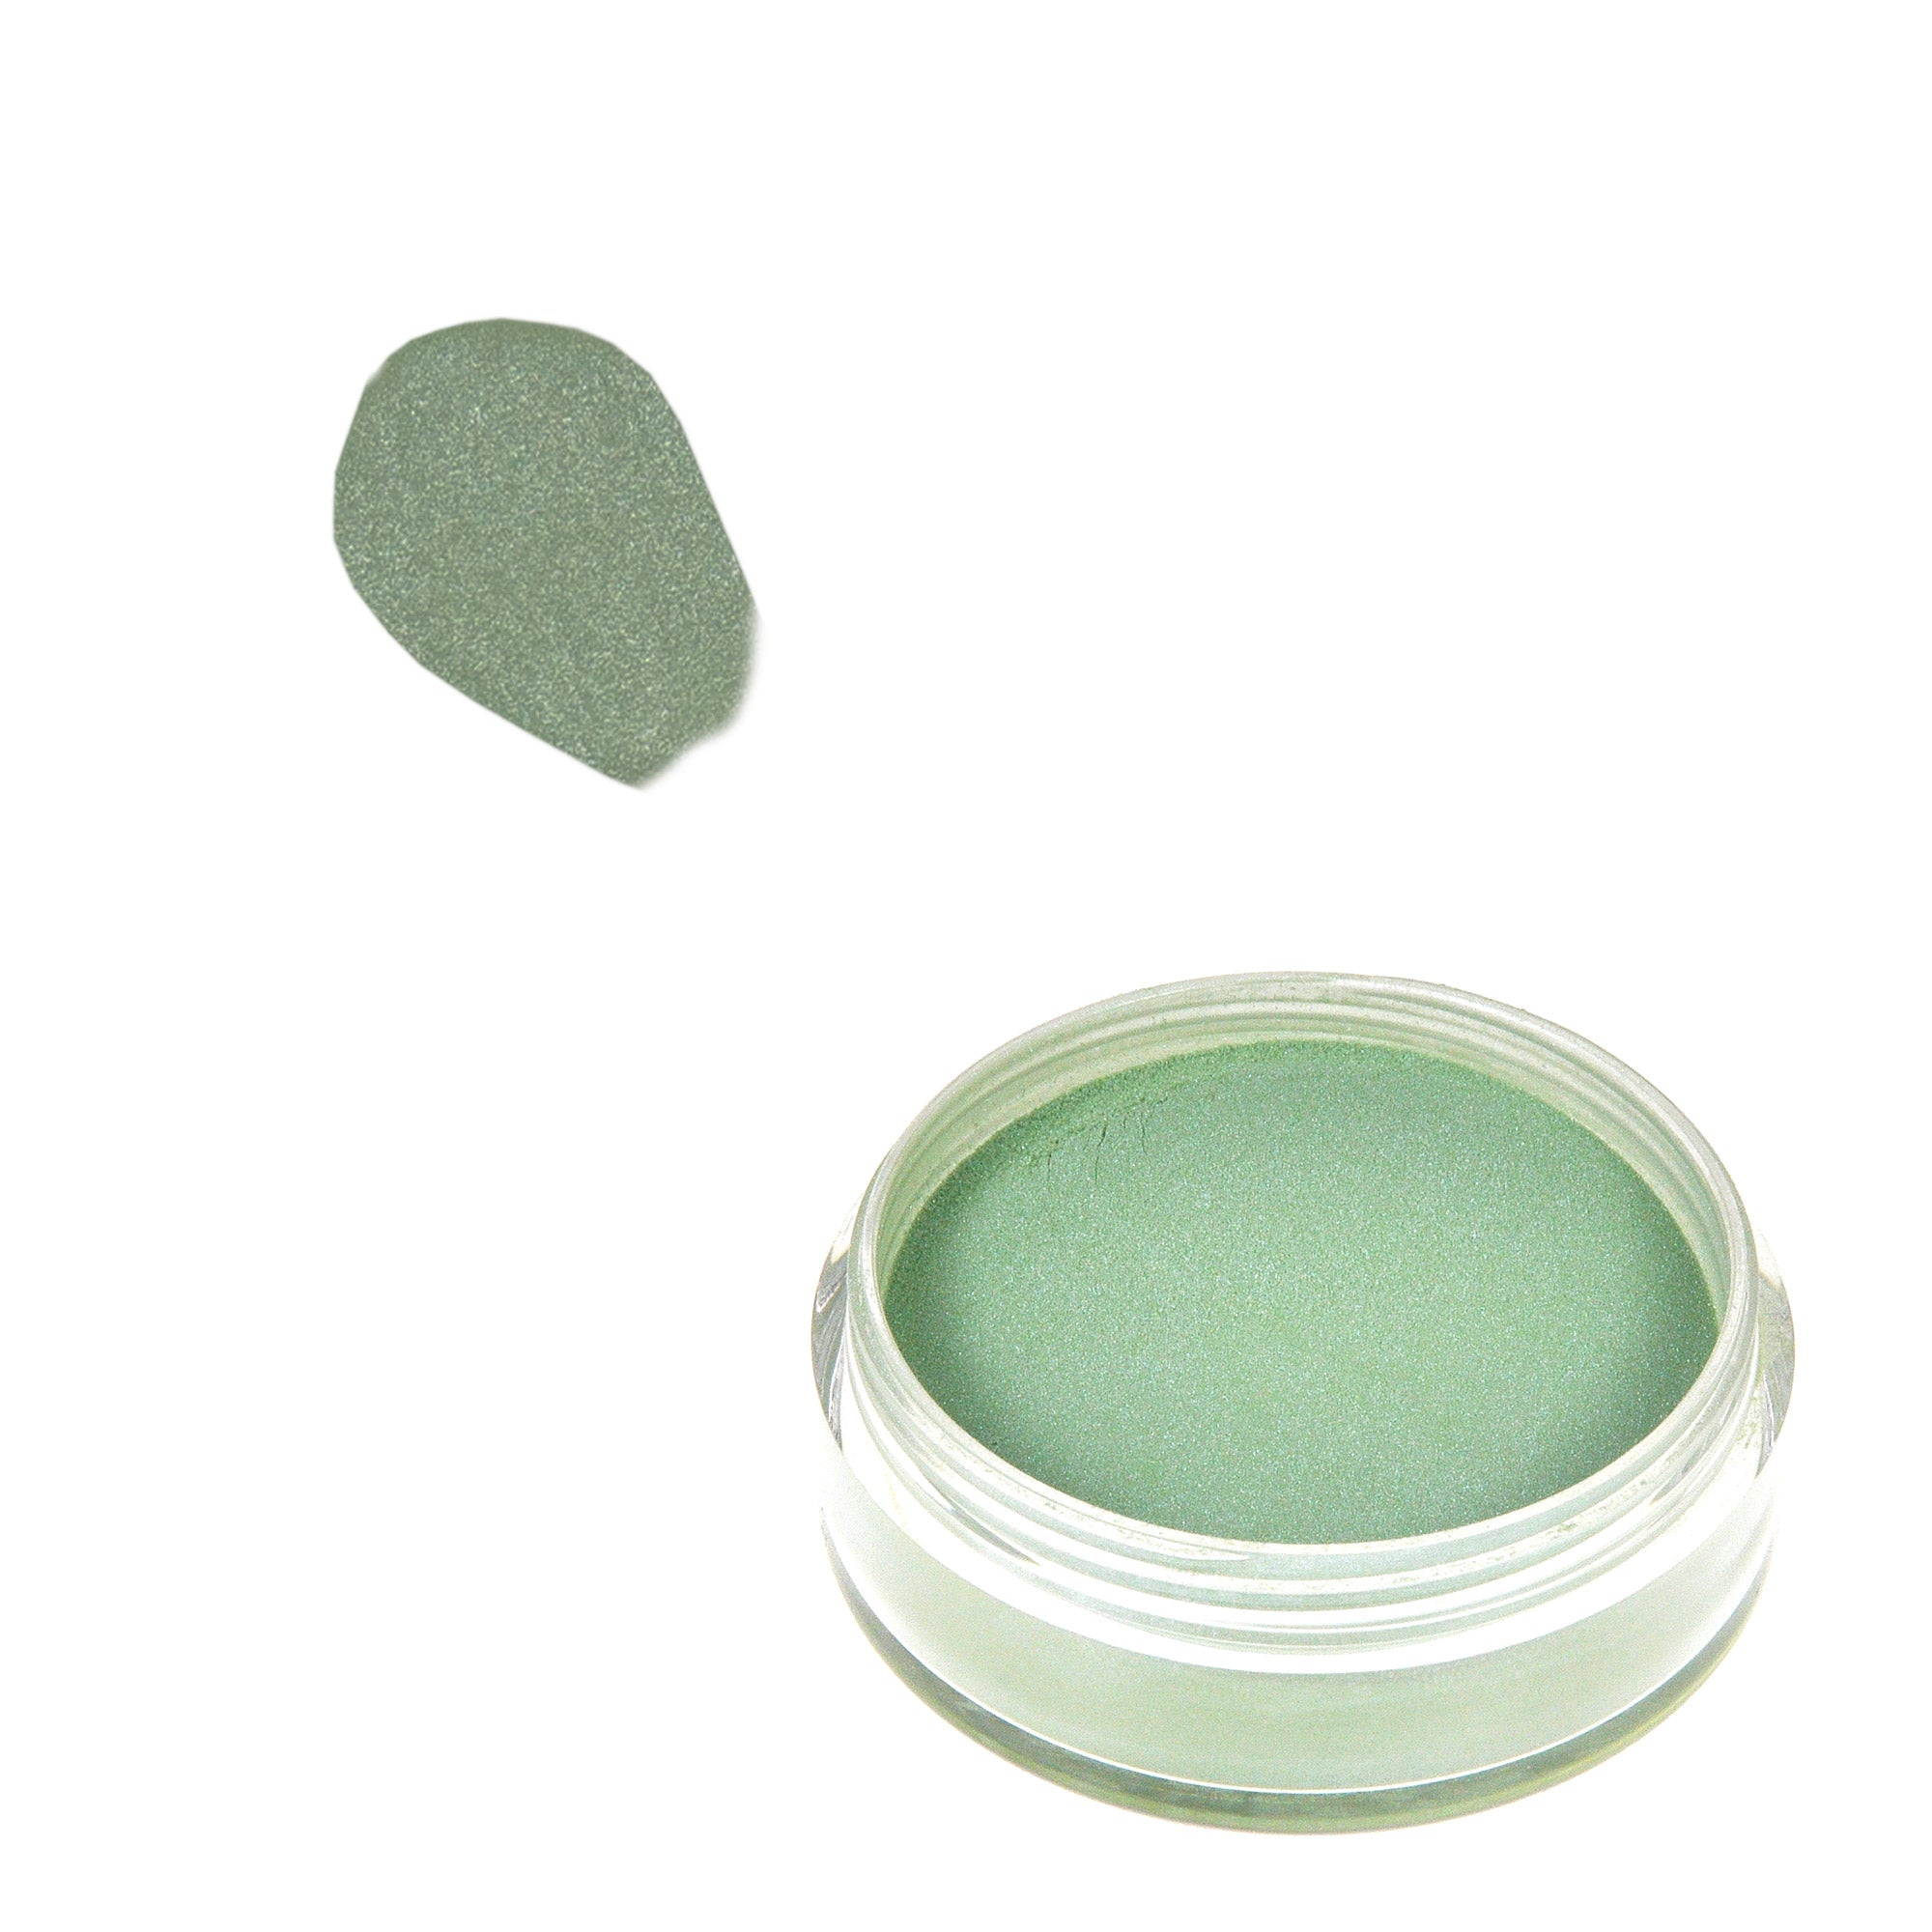 Poudre Acrylique 10 g - Pearl Green